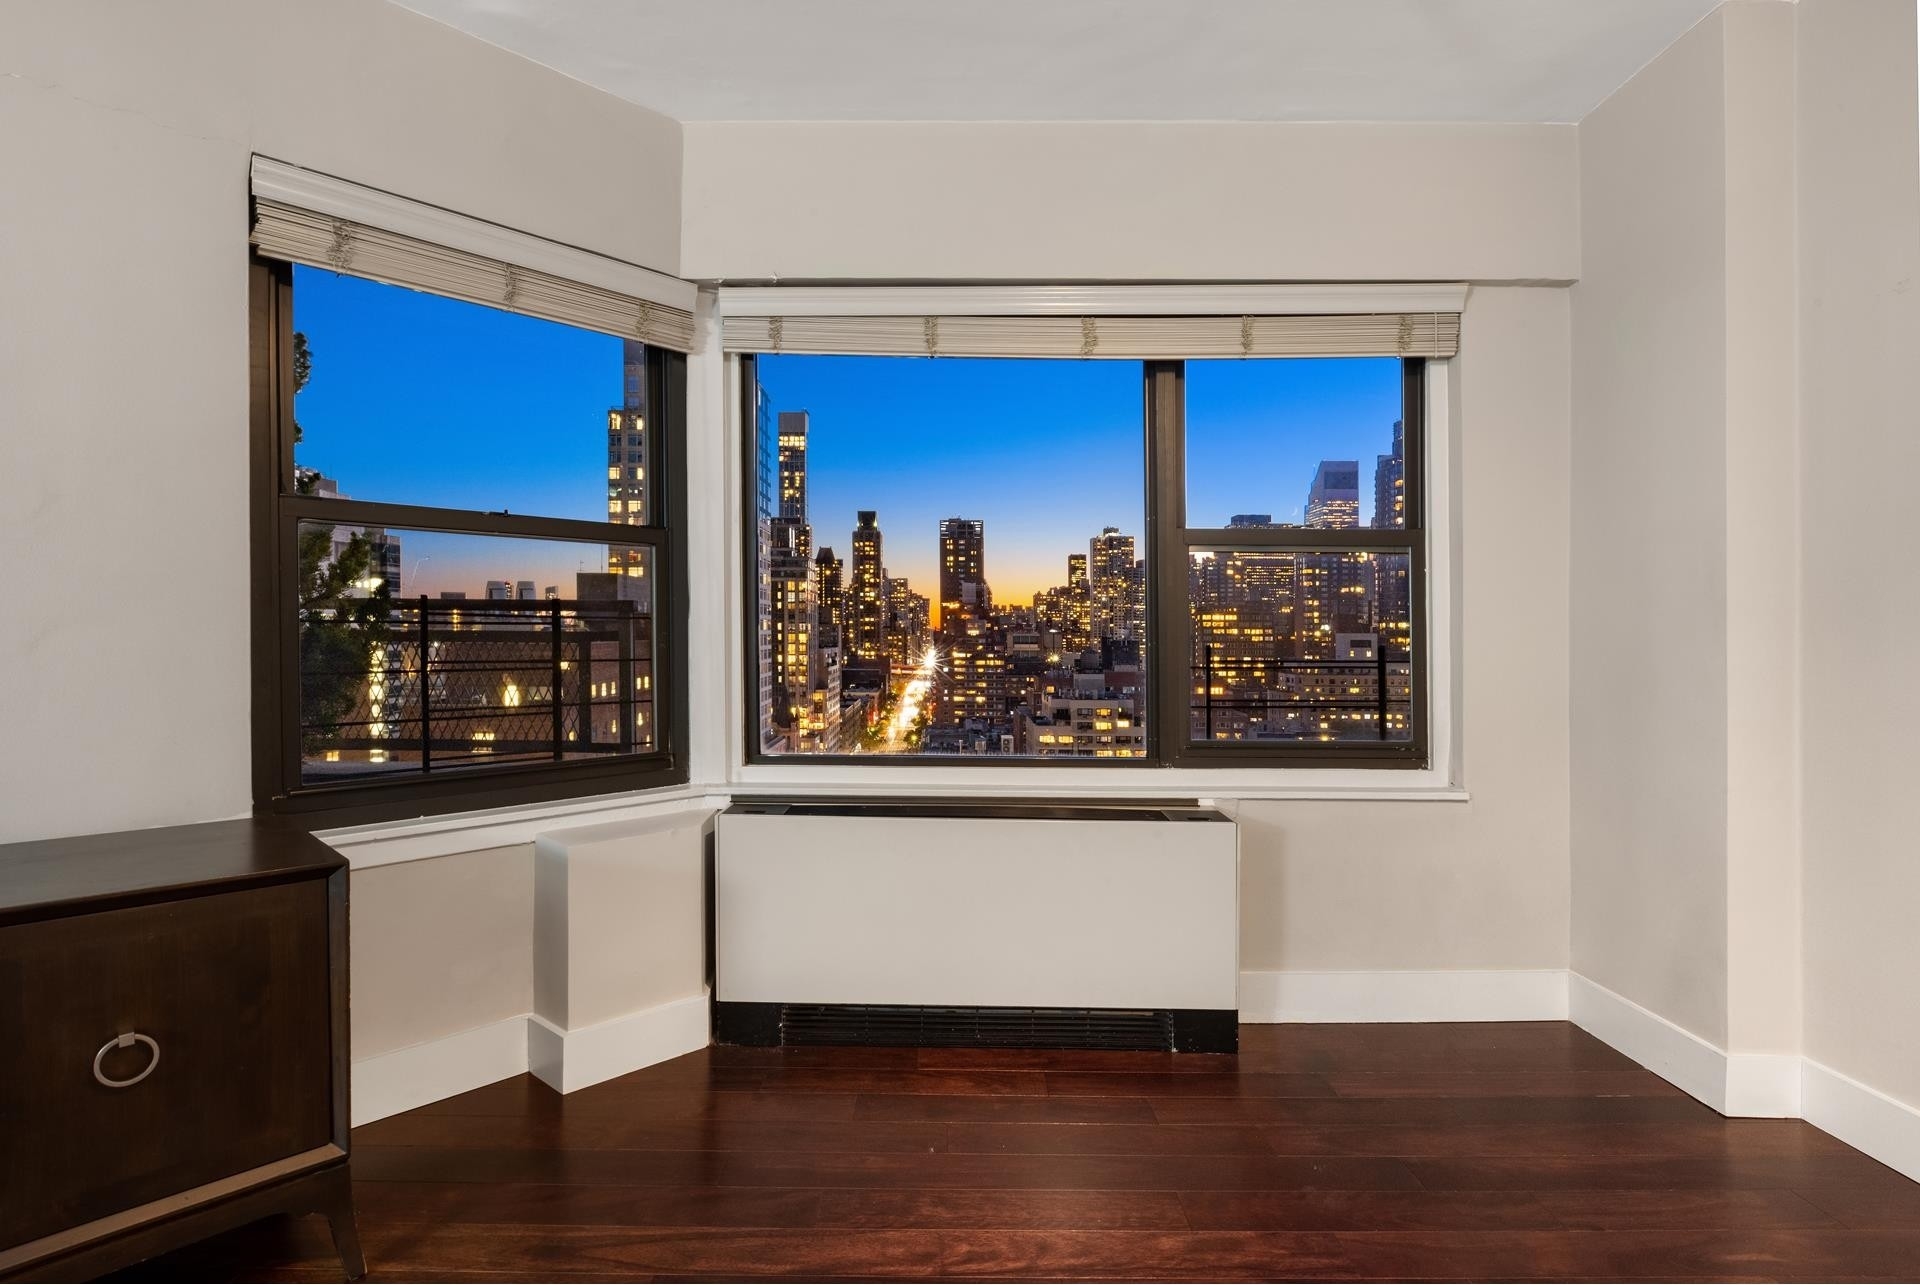 13. Co-op Properties for Sale at 345 E 69TH ST, PHC Lenox Hill, New York, New York 10021